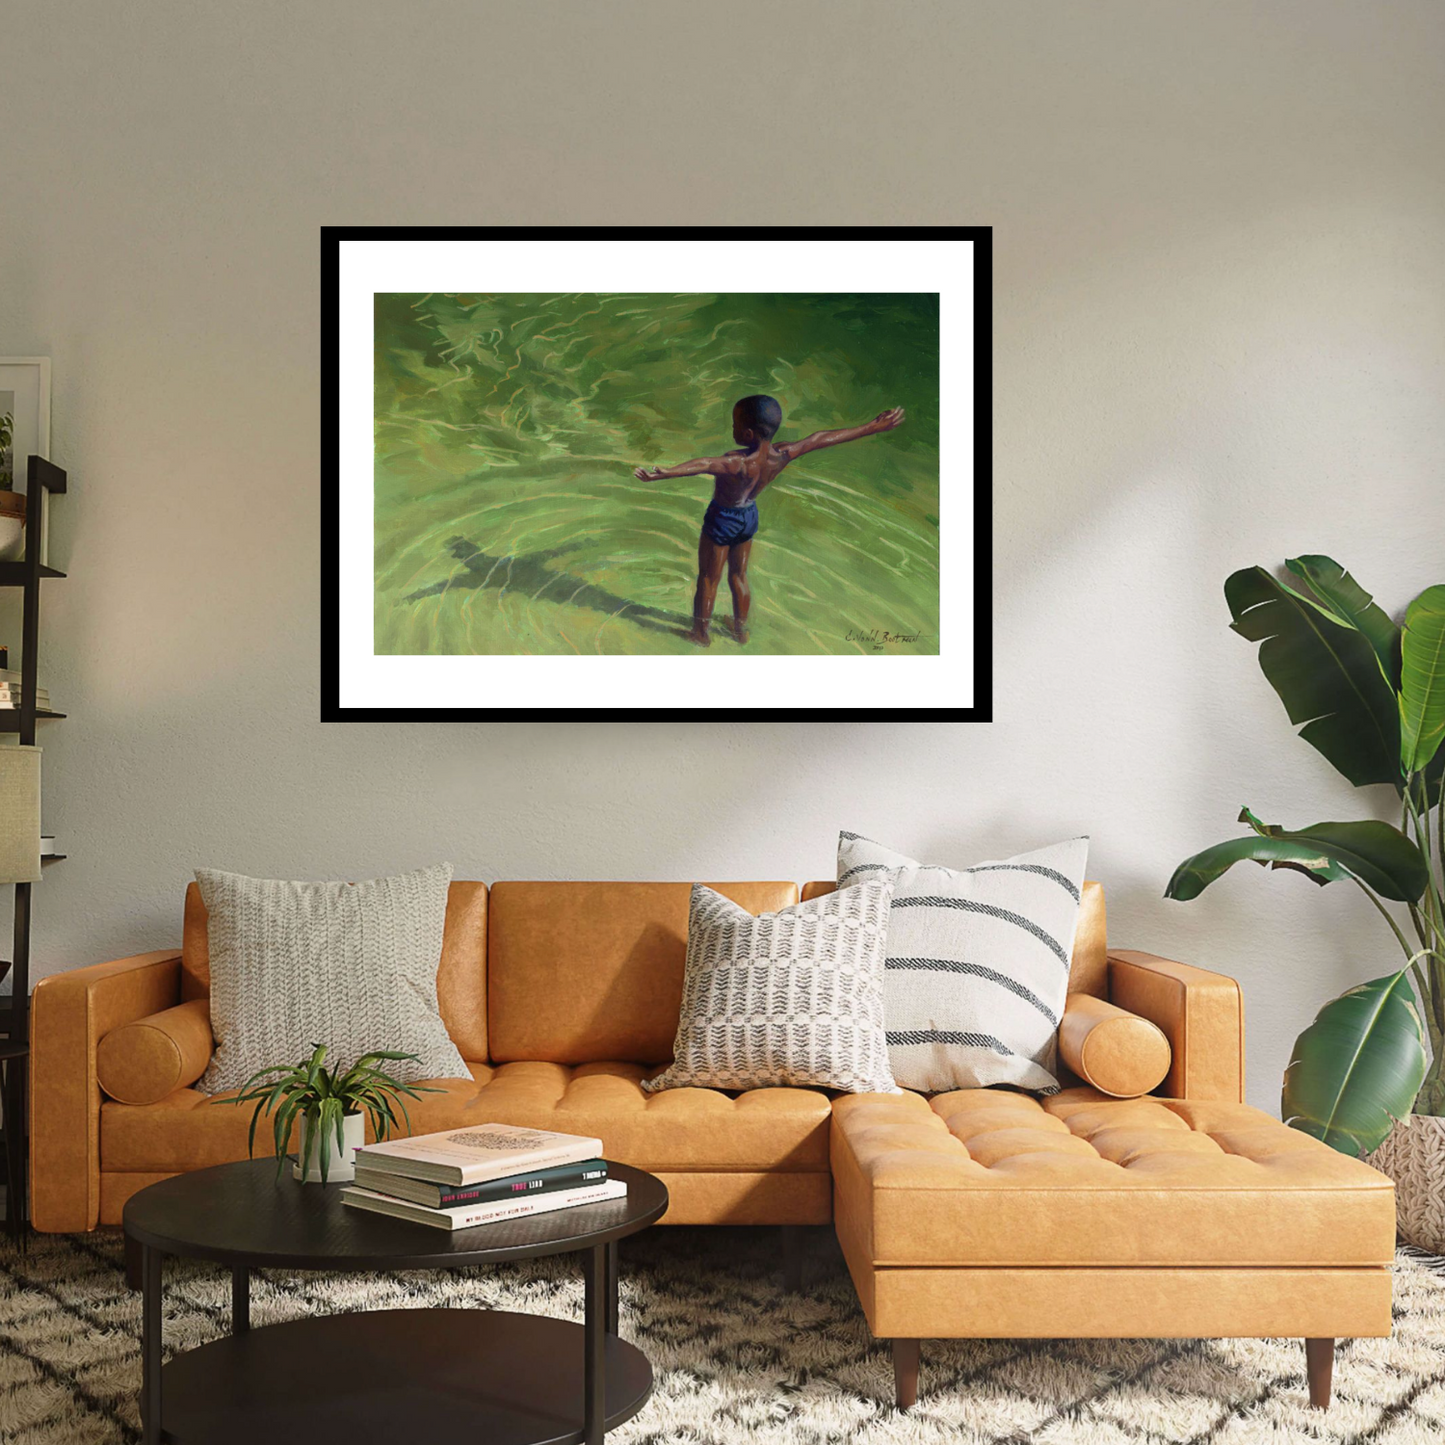 Black framed print ‘Me’ by Colin Bootman is a vibrant contemporary landscape where a boy wearing a swimming suit is seen from above, standing with open arms in a bright green river water 